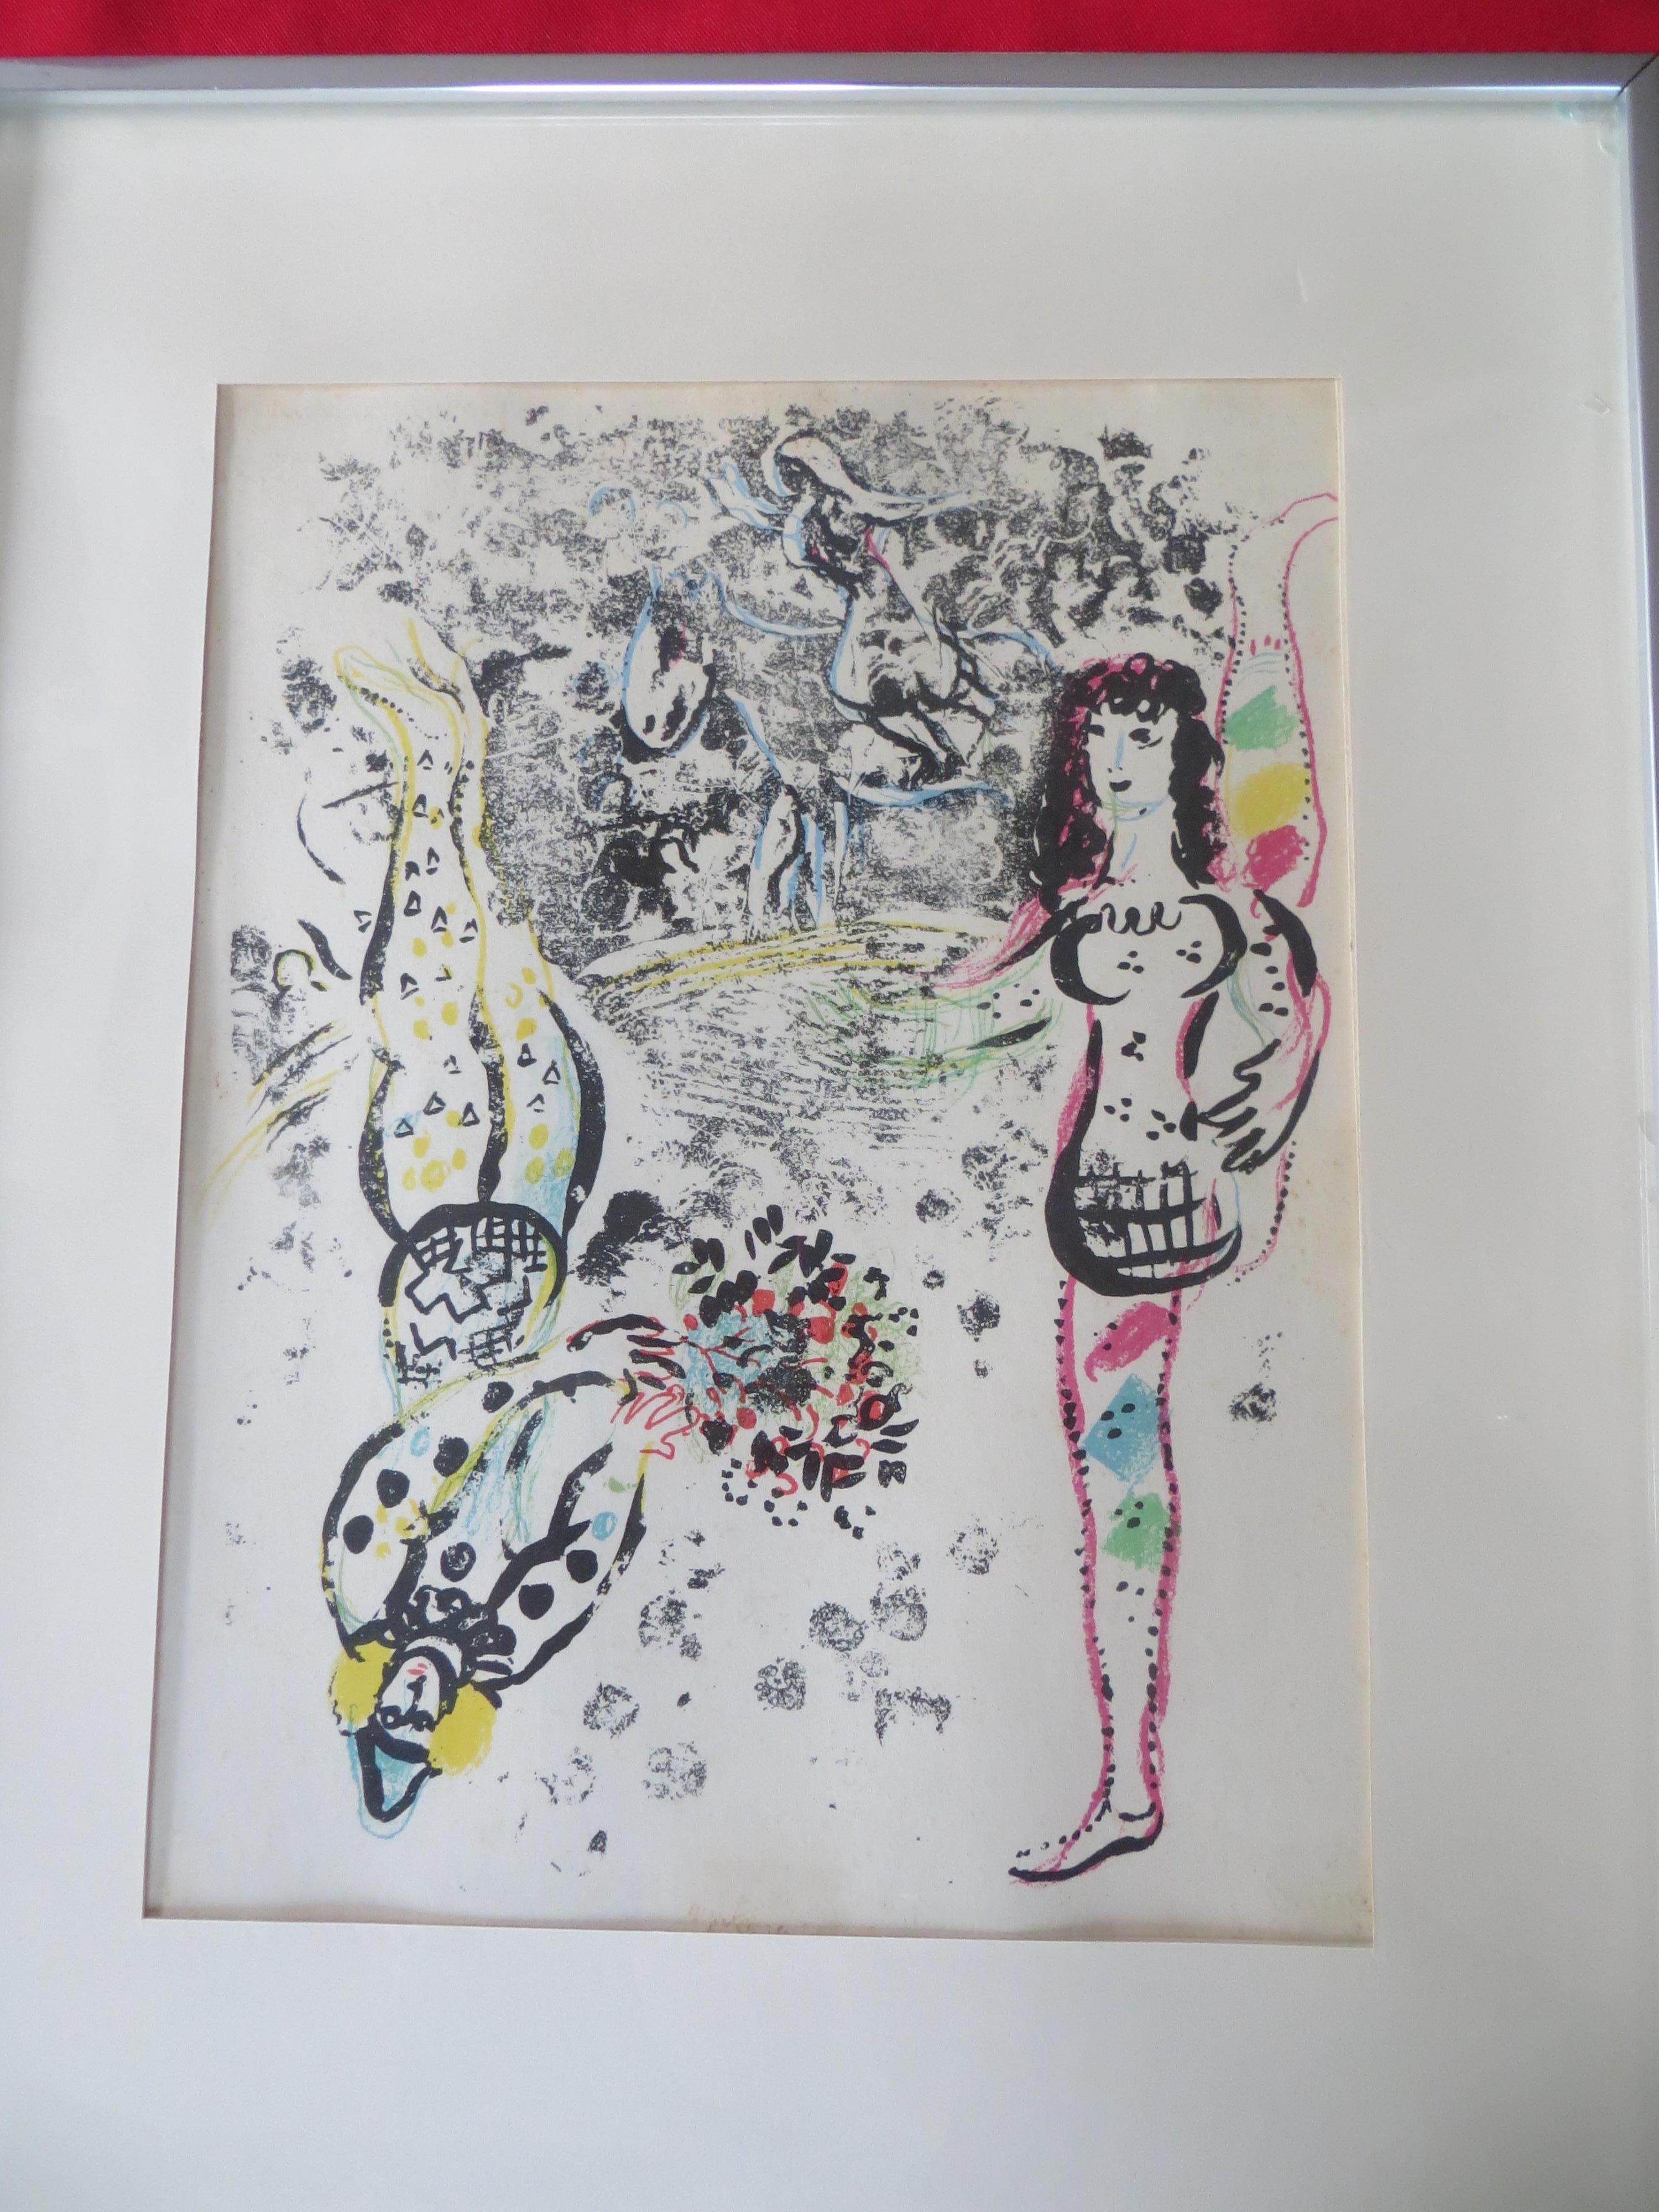   Marc Chagall  Lithographe L'Acrobate  - Modern Print by (after) Marc Chagall